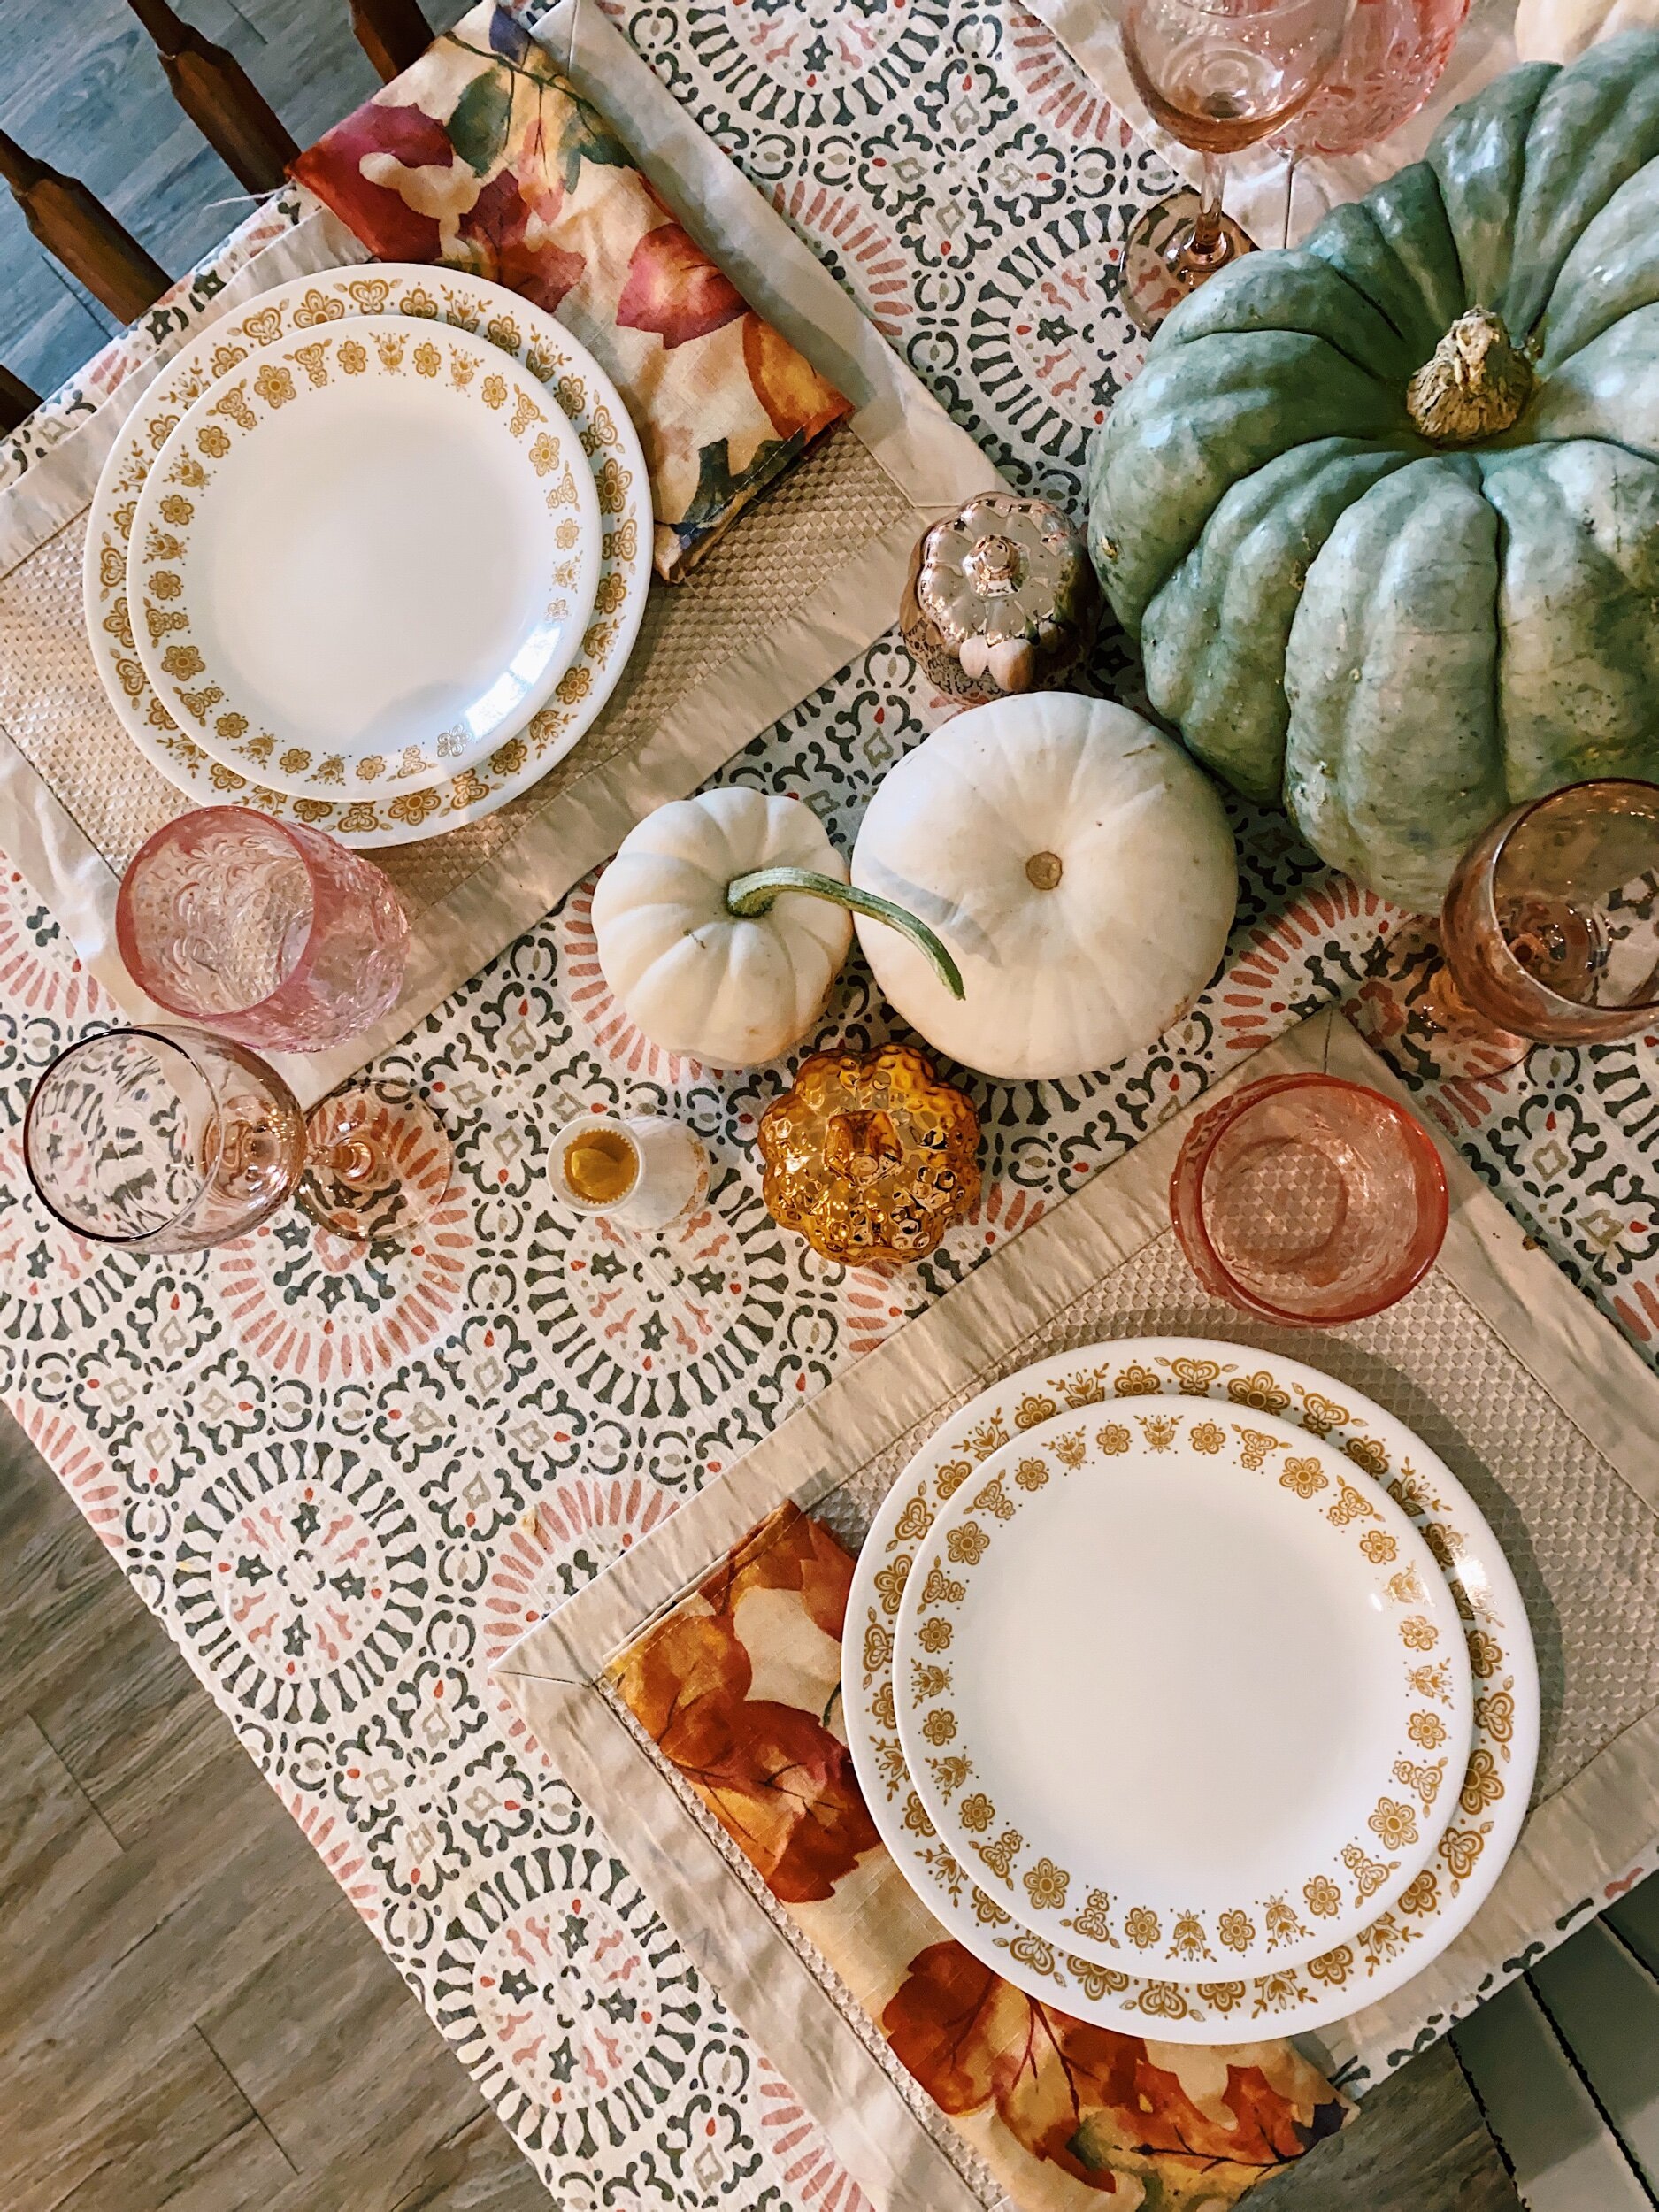 Three Heel Clicks - How to Set an Fall Inspired Table